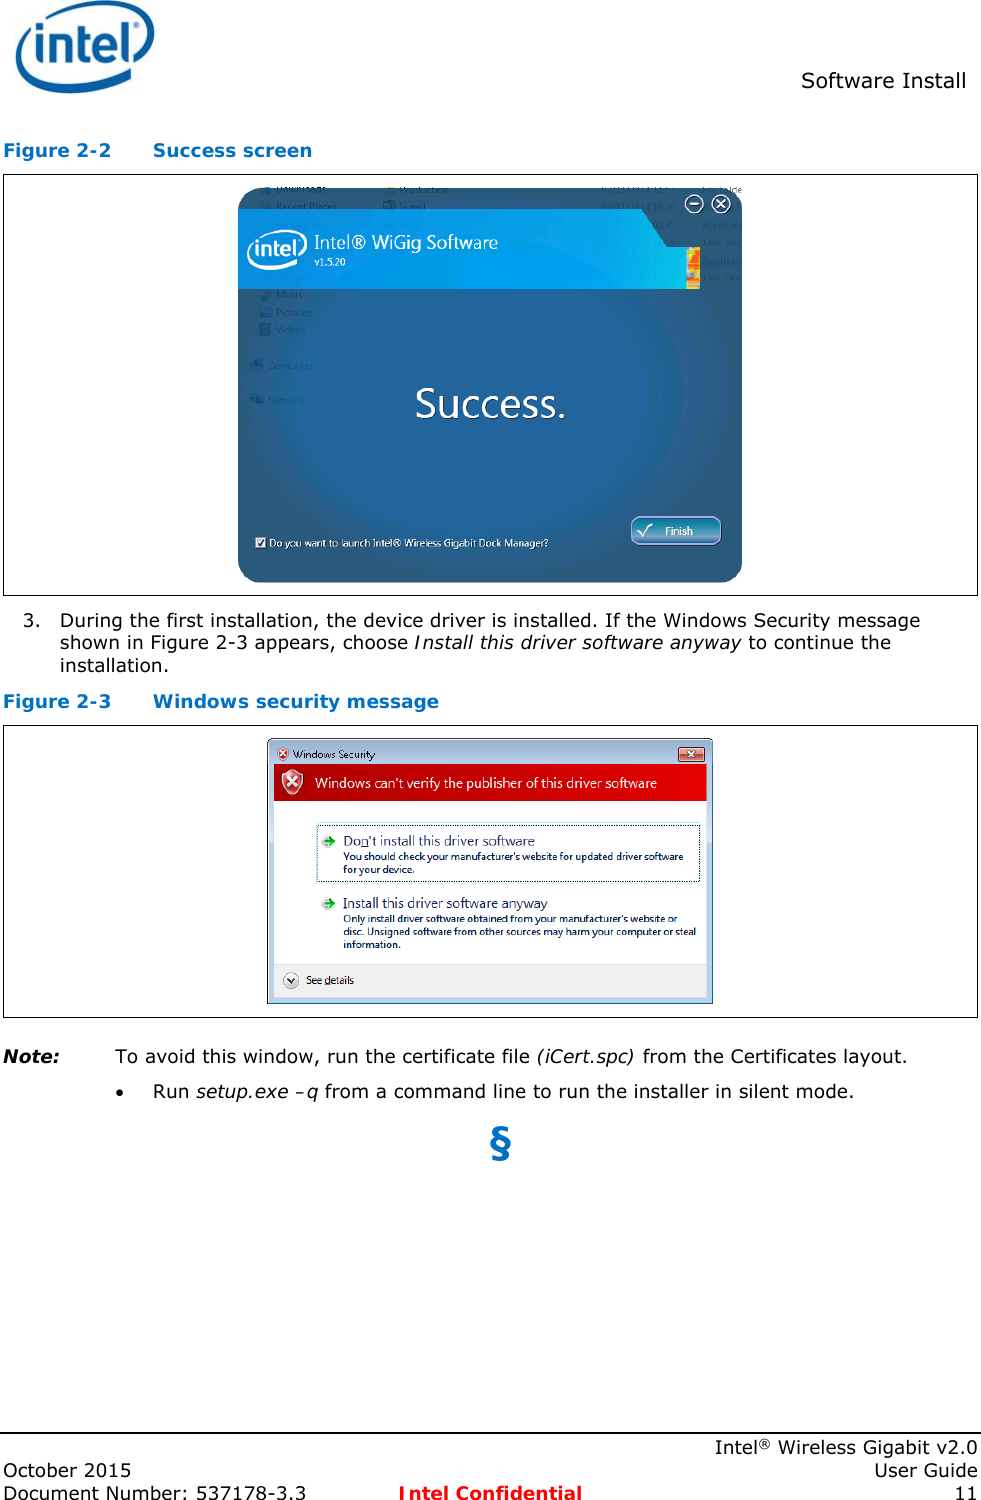  Software Install    Intel® Wireless Gigabit v2.0 October 2015    User Guide Document Number: 537178-3.3  Intel Confidential 11 Figure 2-2  Success screen  3. During the first installation, the device driver is installed. If the Windows Security message shown in Figure 2-3 appears, choose Install this driver software anyway to continue the installation. Figure 2-3  Windows security message  Note: To avoid this window, run the certificate file (iCert.spc) from the Certificates layout.  Run setup.exe –q from a command line to run the installer in silent mode. §  